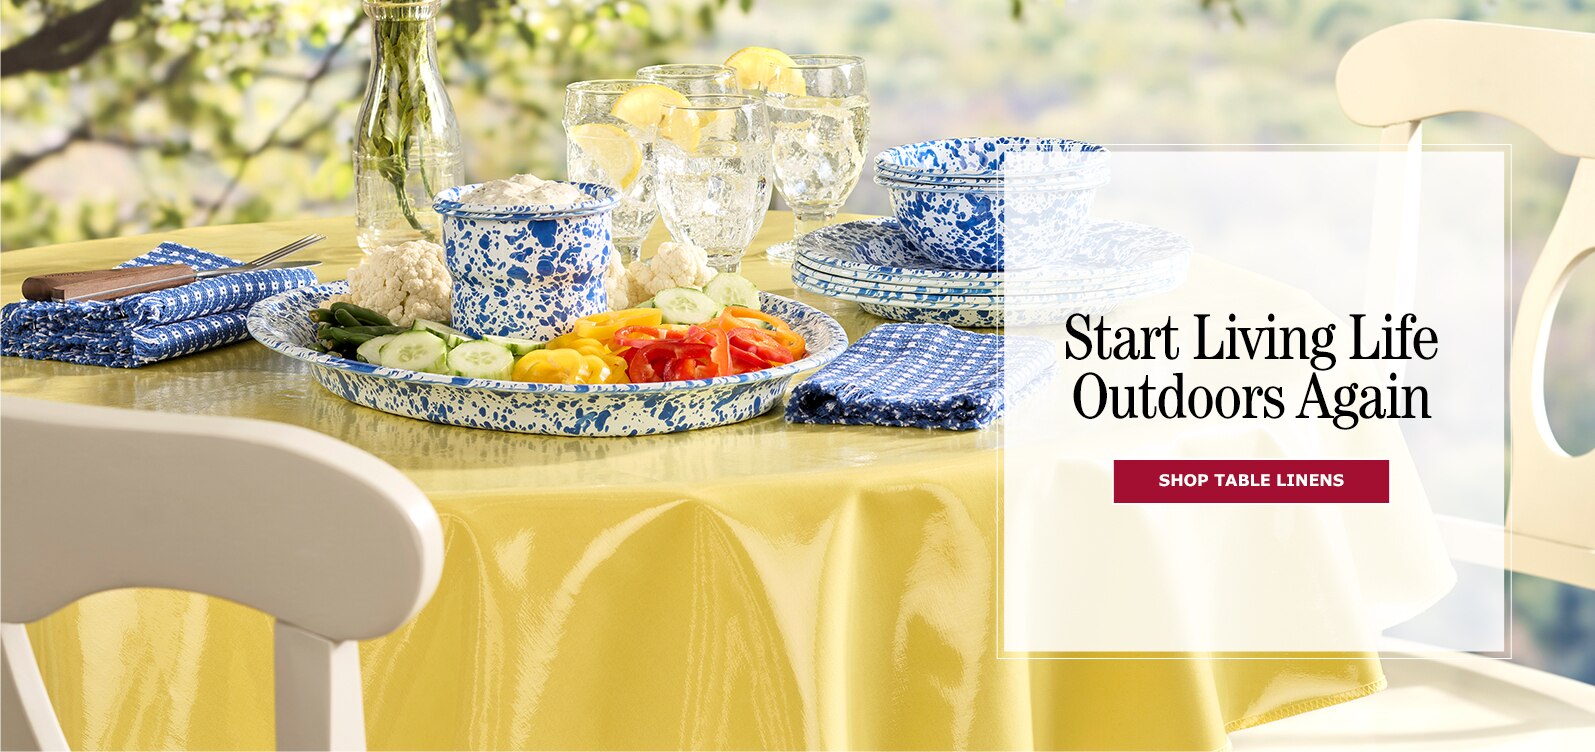 Start Living Life Outdoors Again. Shop Table Linens.